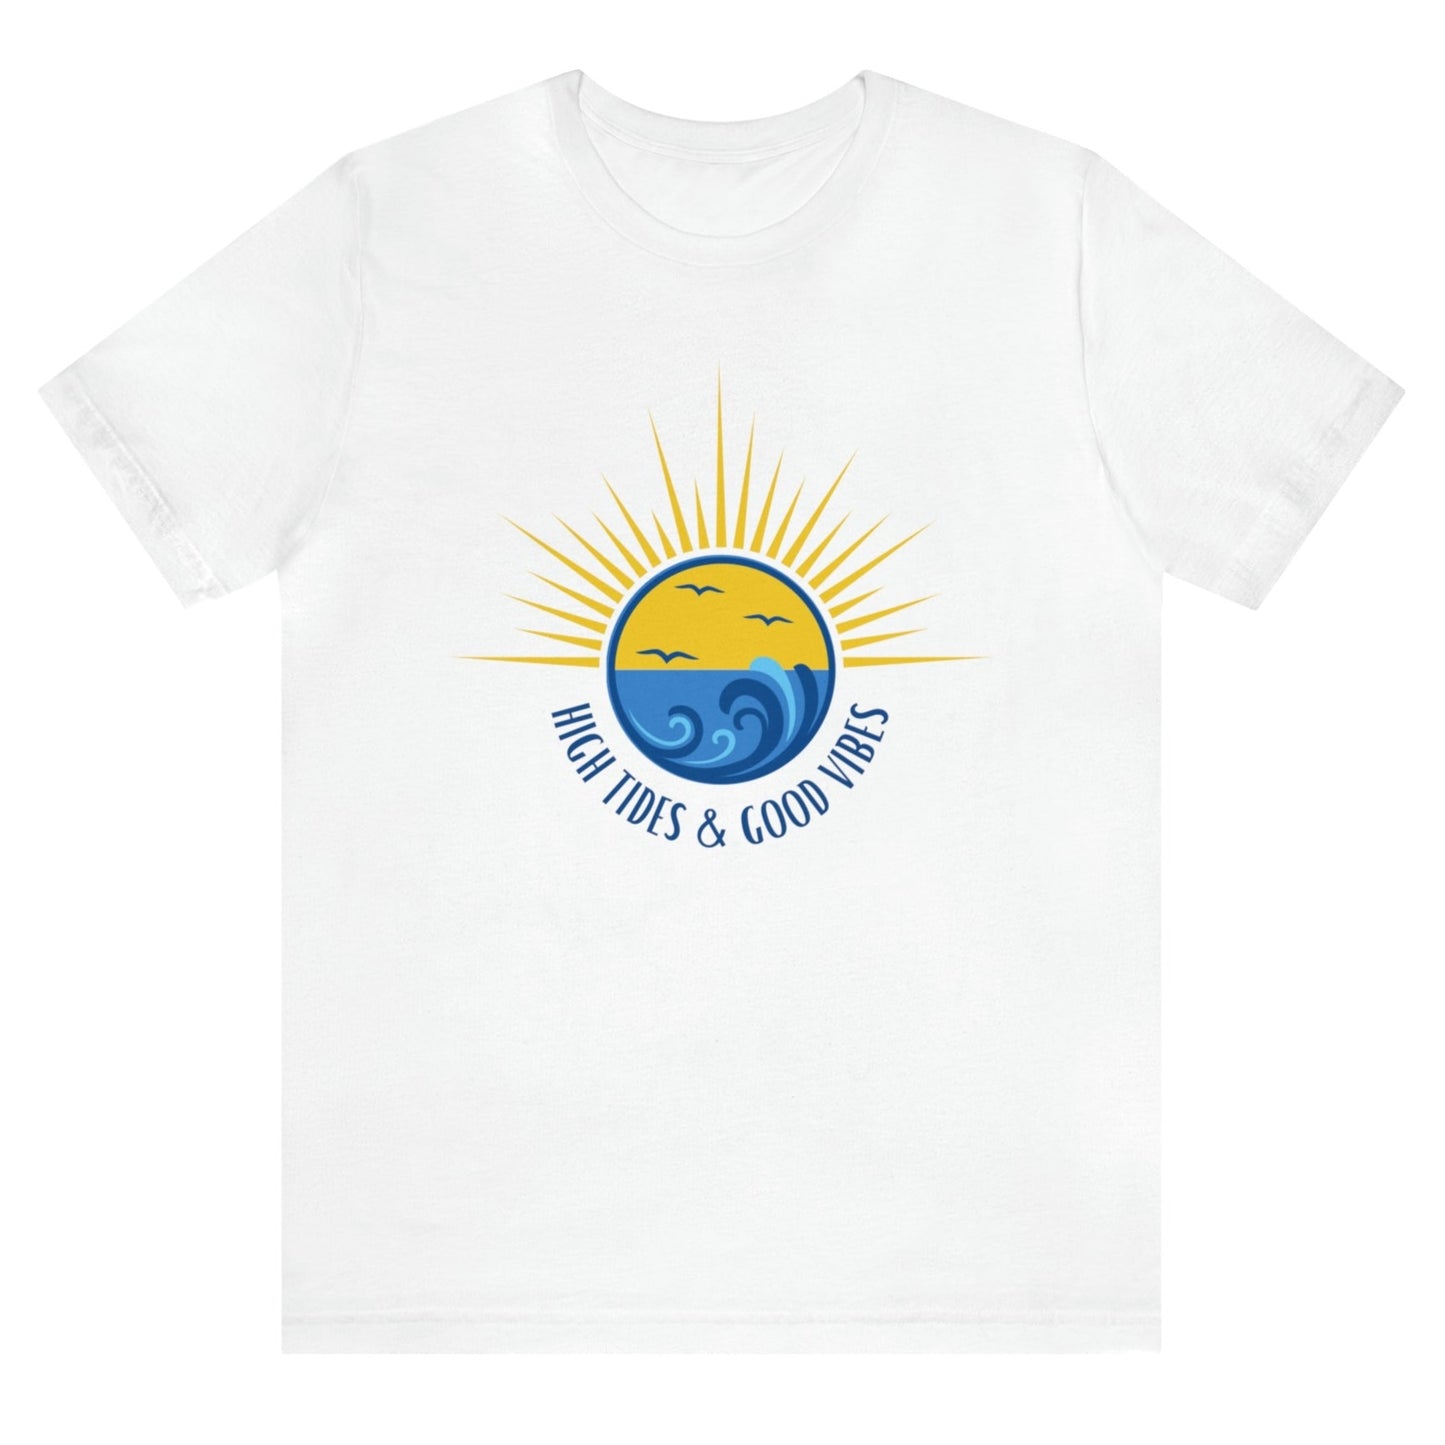 high-tides-and-good-vibes-white-t-shirt-beach-sunset-unisex